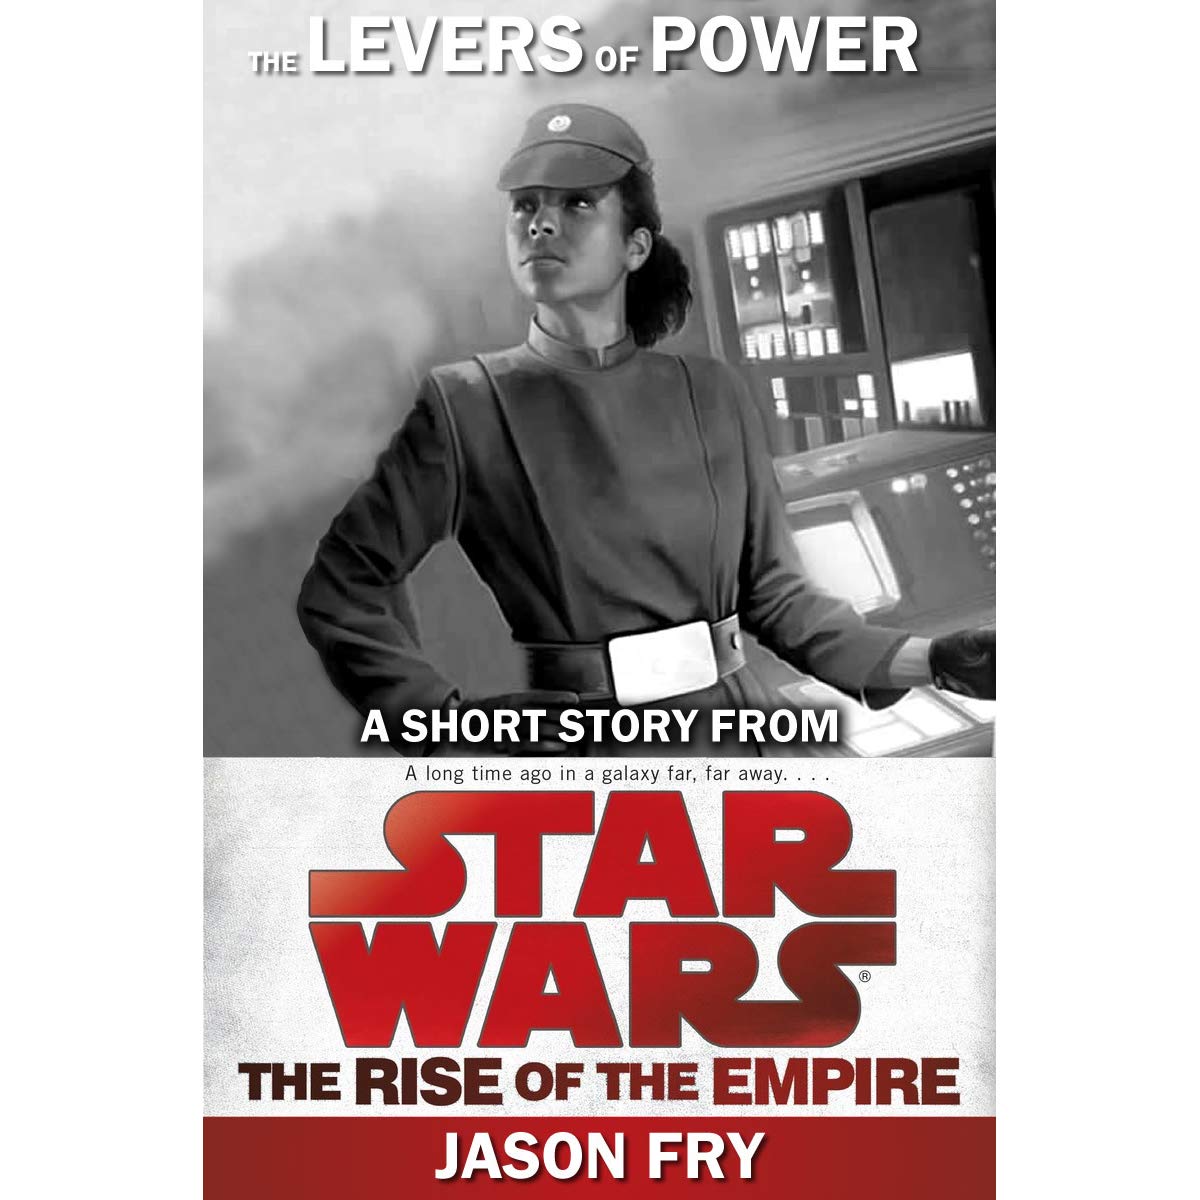 Star Wars: The Levers of Power